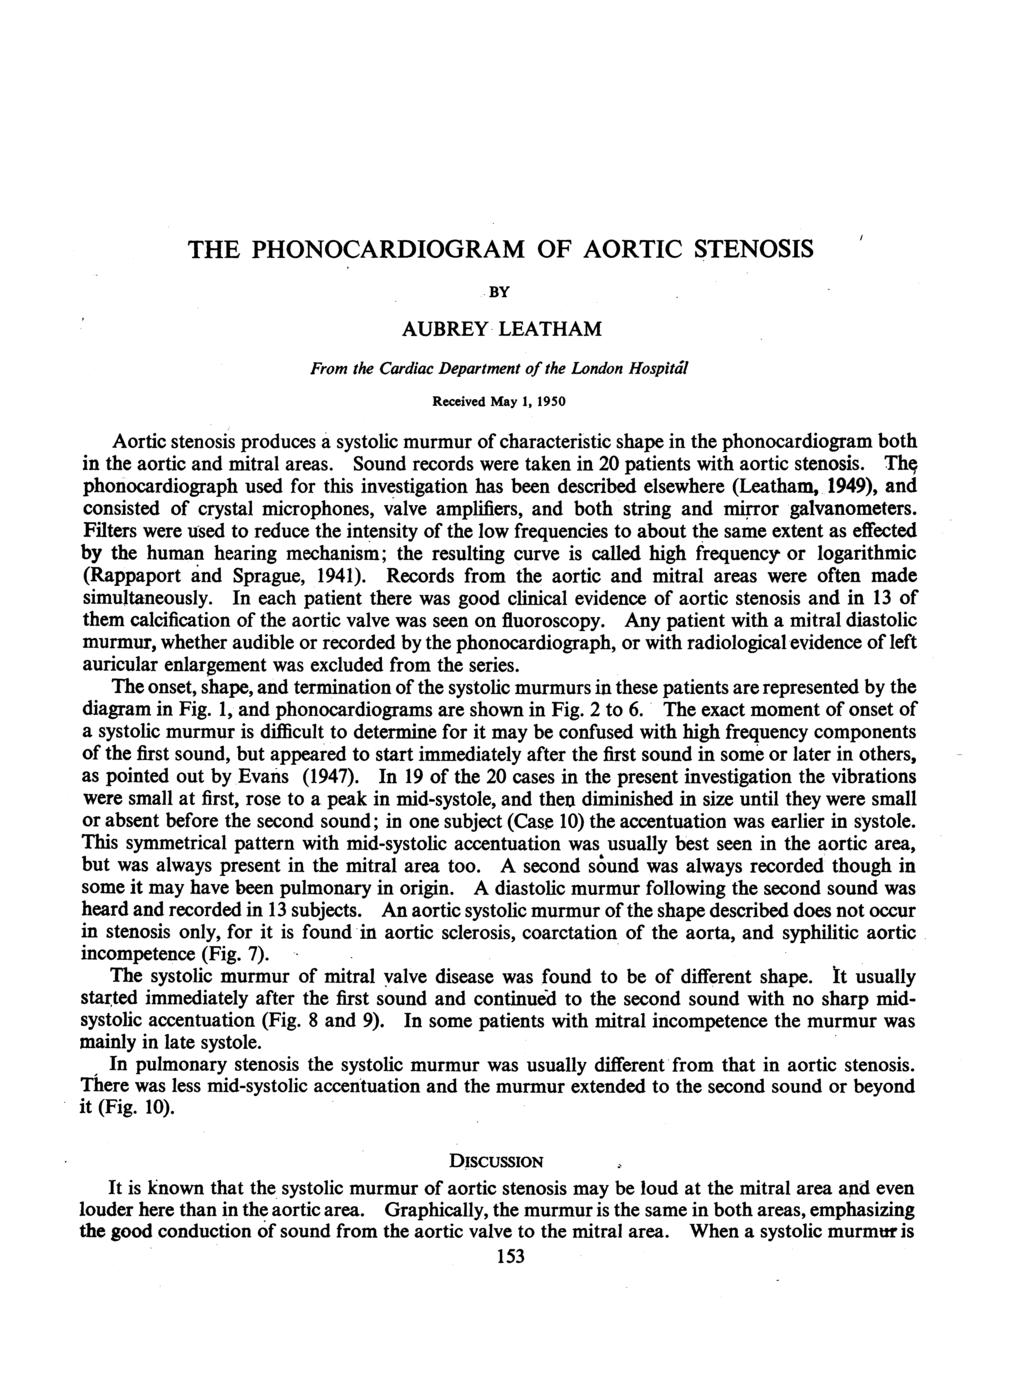 THE PHONOCRDOGRM OF ORTC STENOSS BY UBREY LETHM From the Cardiac Department of the London Hospital Received May 1, 1950 ortic stenosis produces a systolic murmur of characteristic shape in the